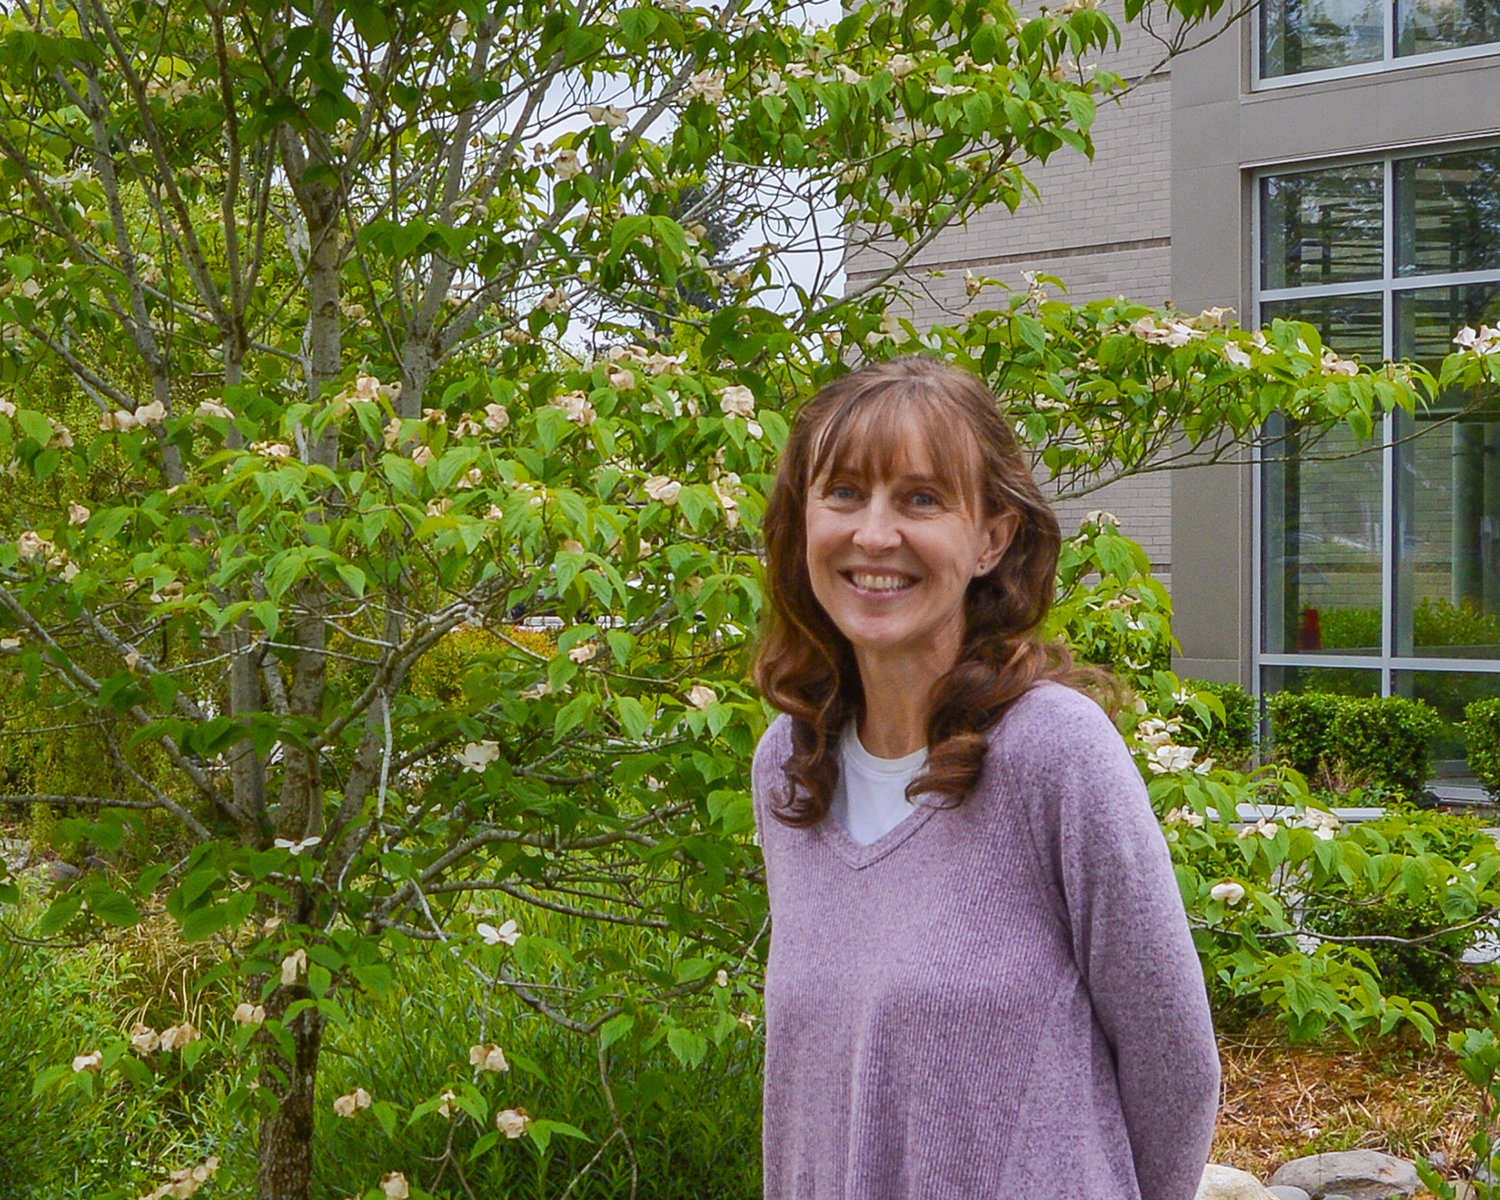 Centralia College instructor Emily Hammargren was recently named the recipient of the 2021 Faculty Member Award, selected by the Washington State Association of College Trustees.